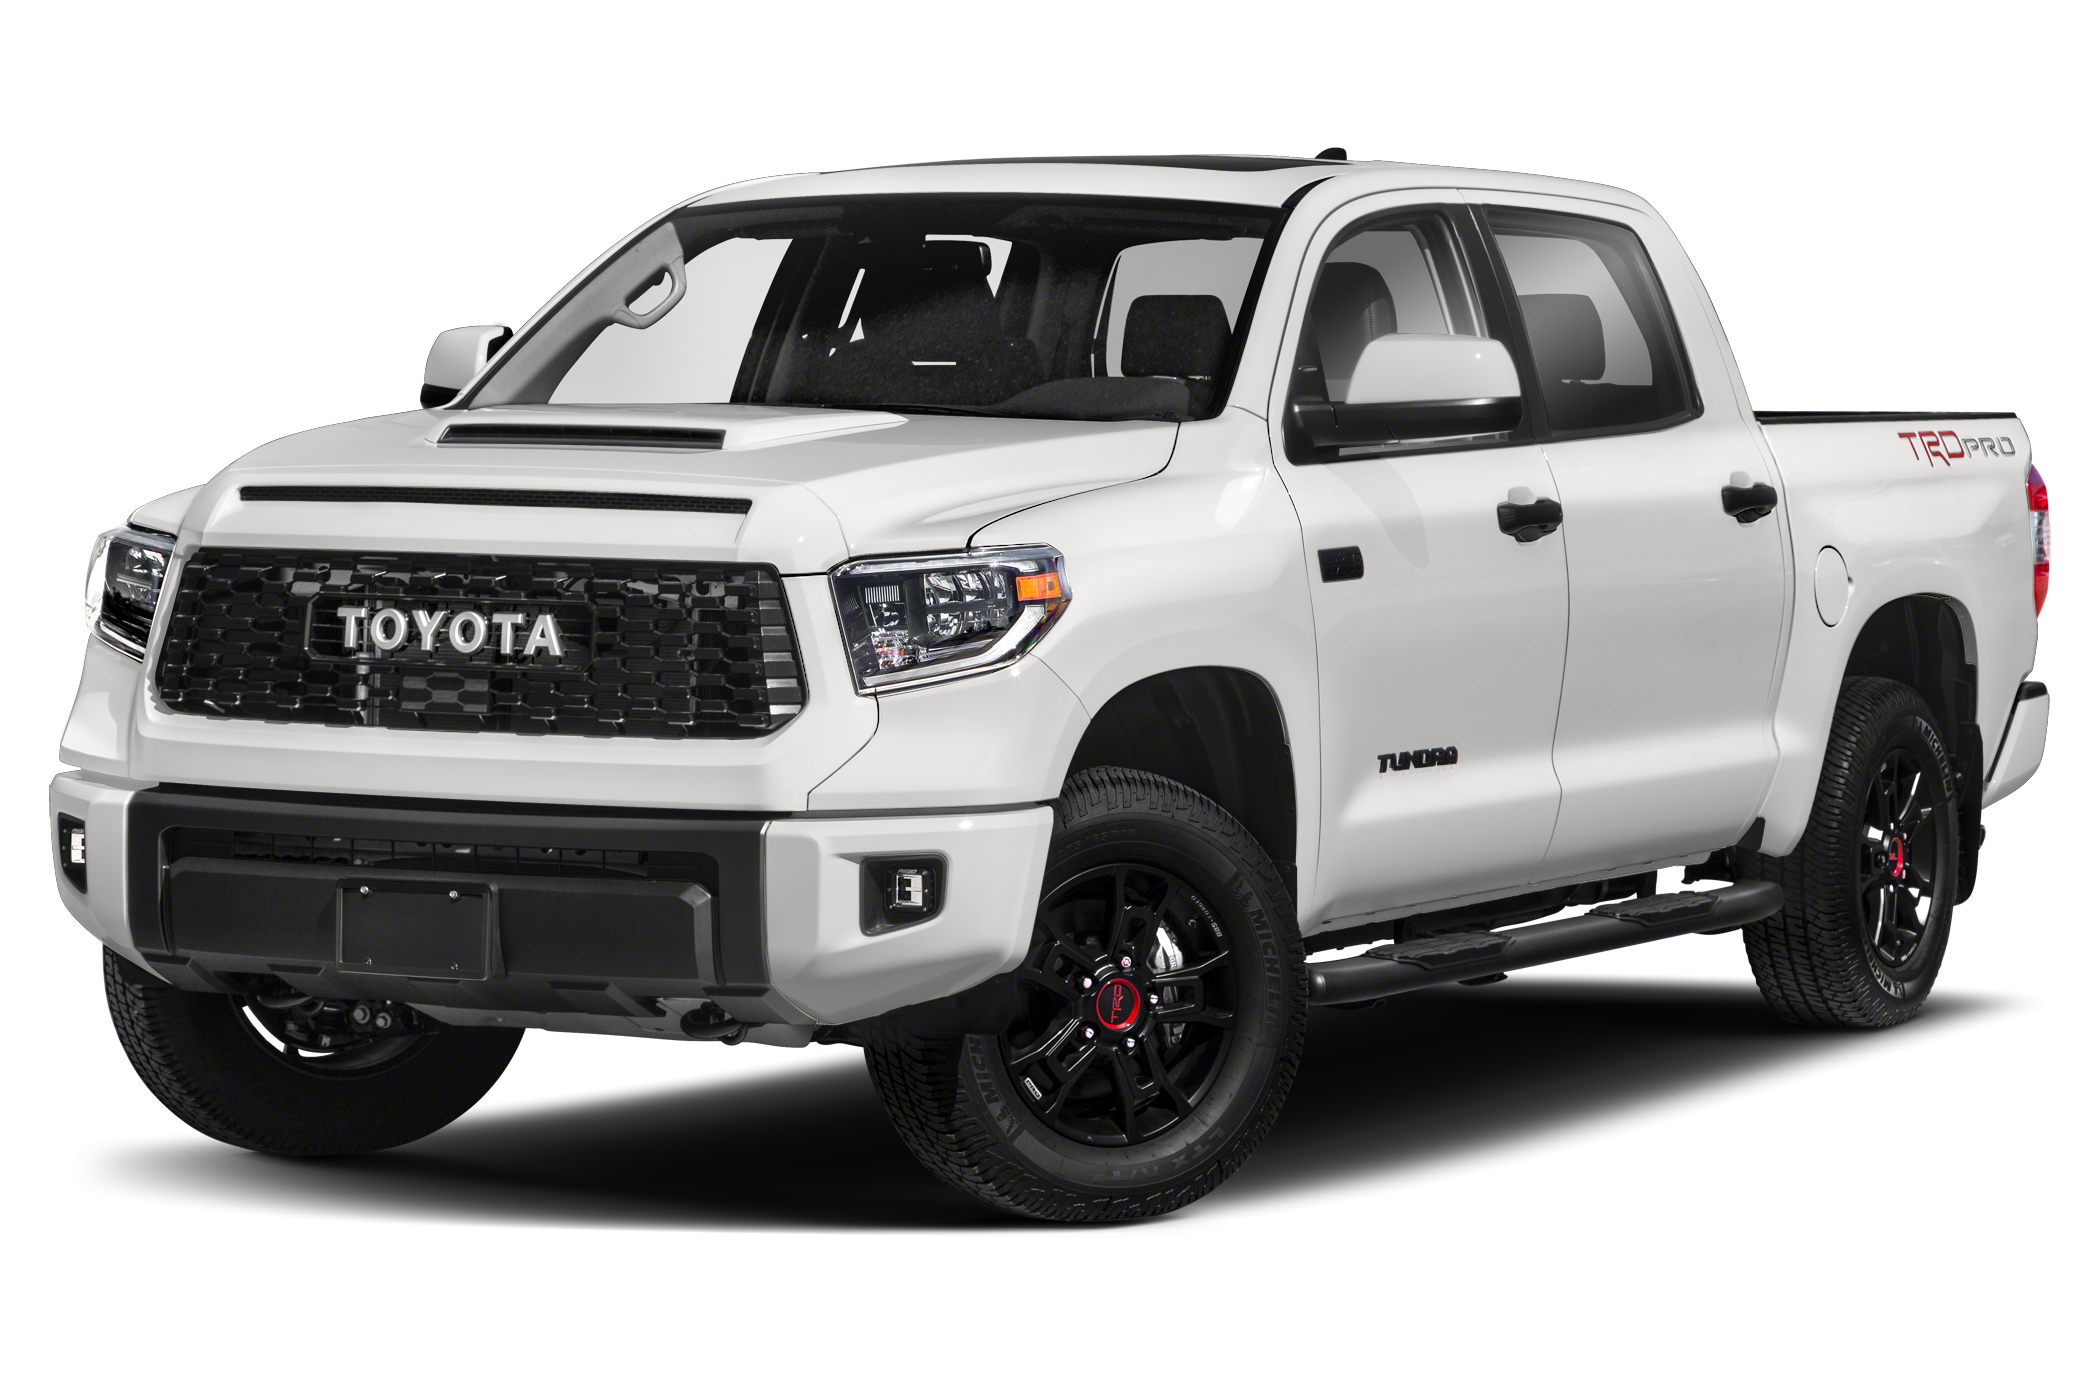 2021 Toyota Tundra oem parts and accessories on sale